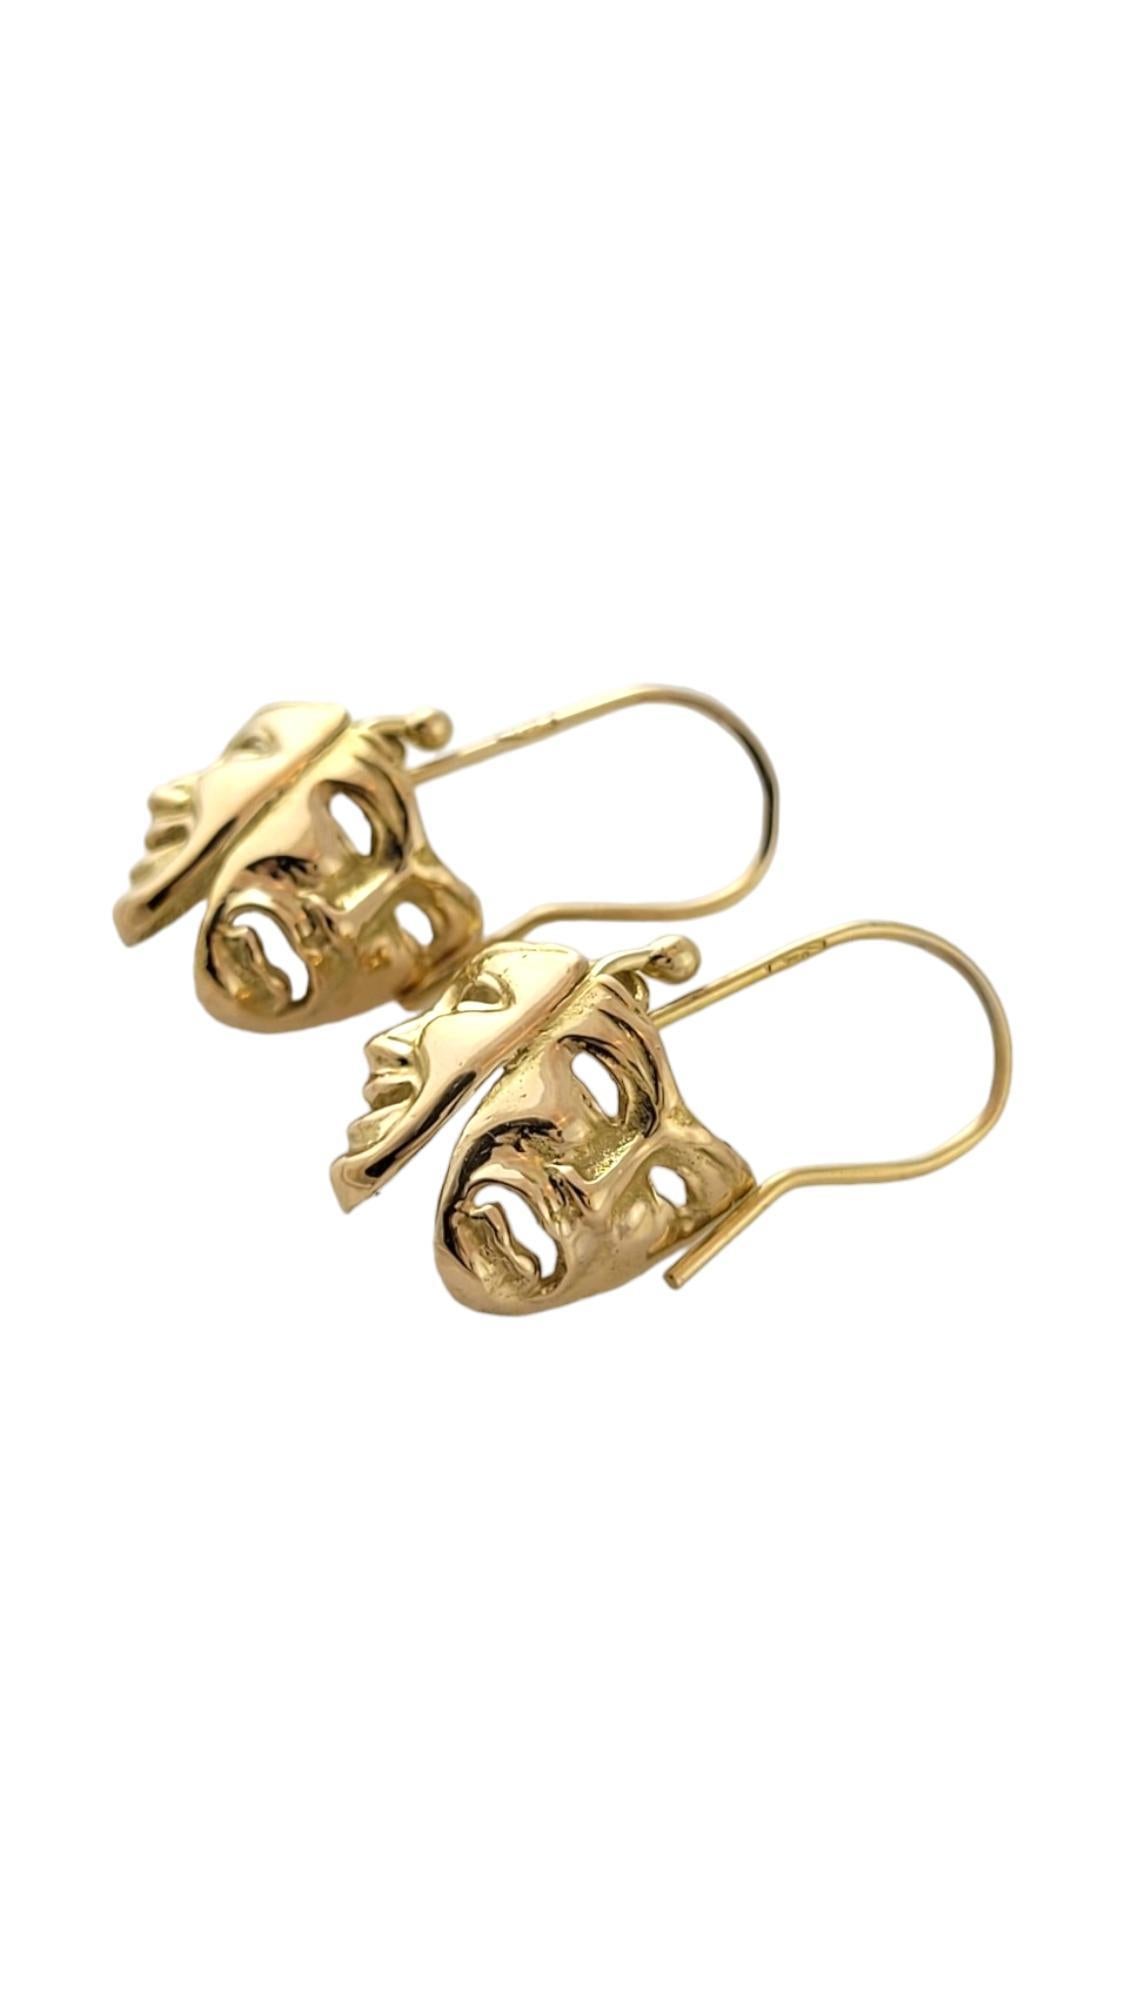 18K Yellow Gold Comedy Tragedy Theater Mask Earrings #16867

These gorgeous comedy tragedy theater mask dangle earrings are crafted from 18K yellow gold and would look beautiful on anybody!

Size: 28.1mm X 13.6mm X 8.5mm

Weight: 2.3 dwt/ 3.6